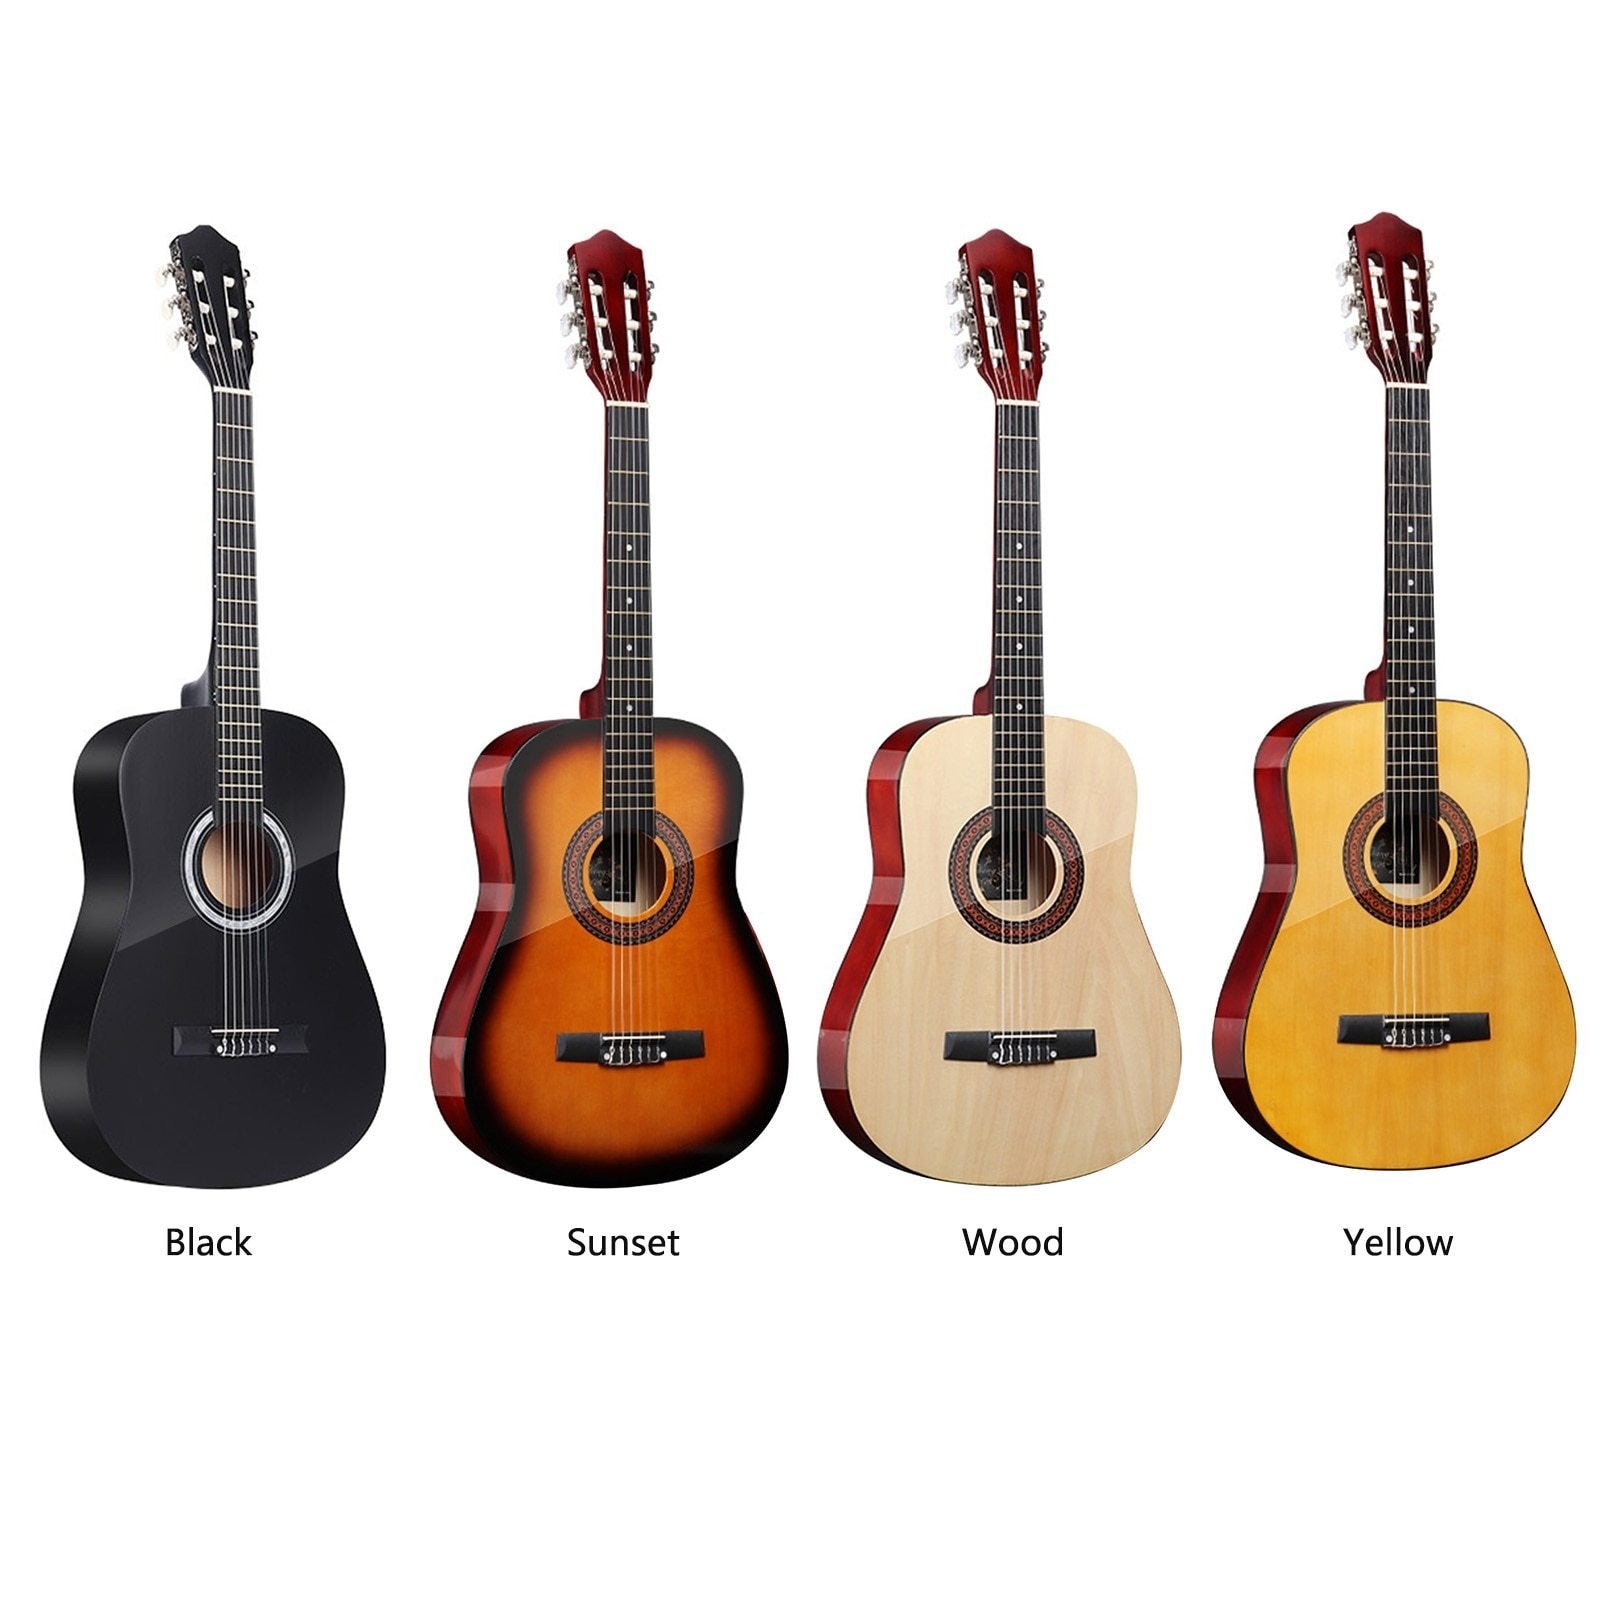 38'' Classic Acoustic Guitar 38 inches 6 Strings Acoustic Guitar Wooden Guitar for Students Beginners (Wood) - AKLOT